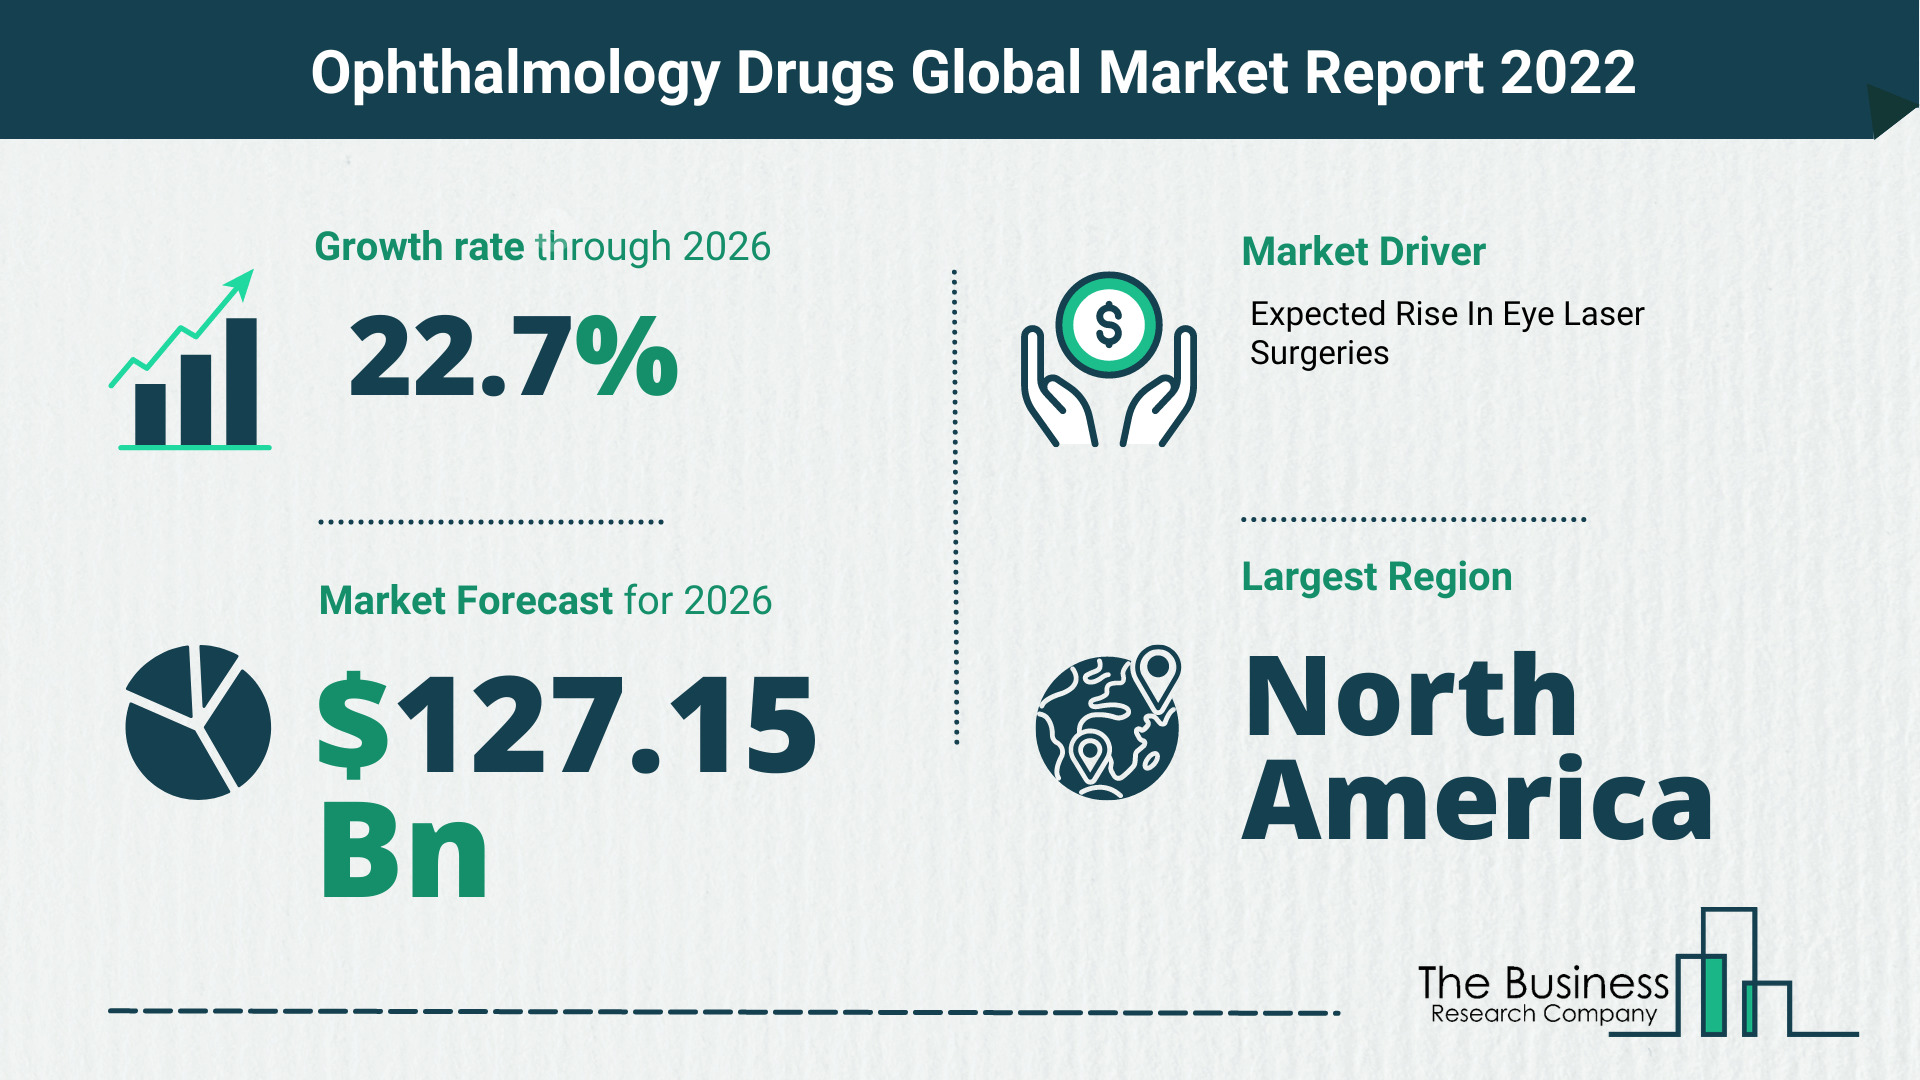 Global Ophthalmology Drugs Market 2022 – Market Opportunities And Strategies